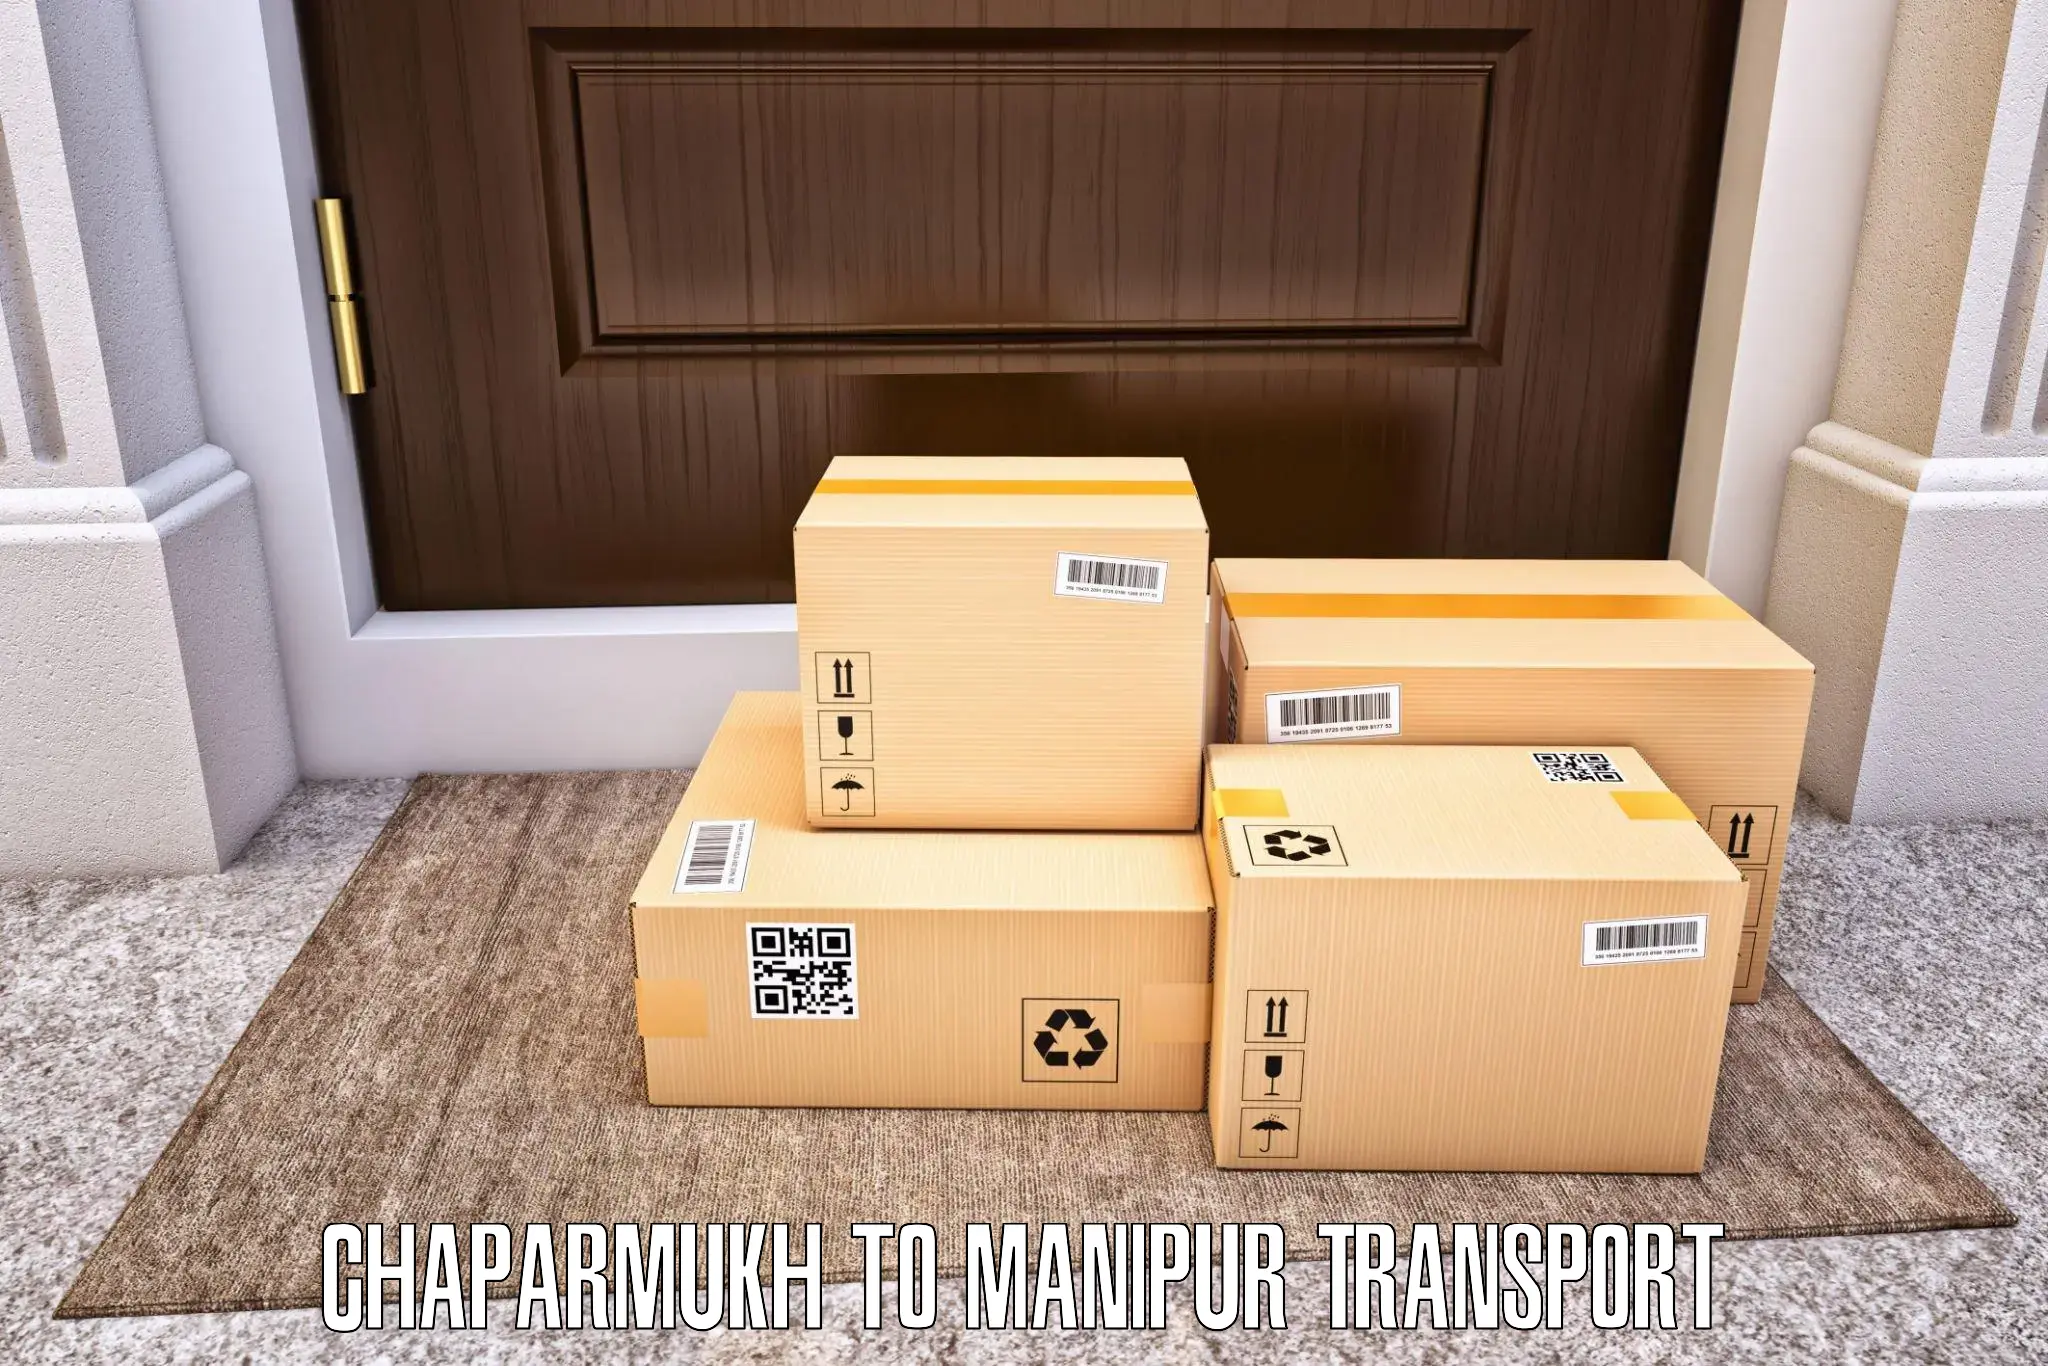 Cargo train transport services Chaparmukh to Manipur